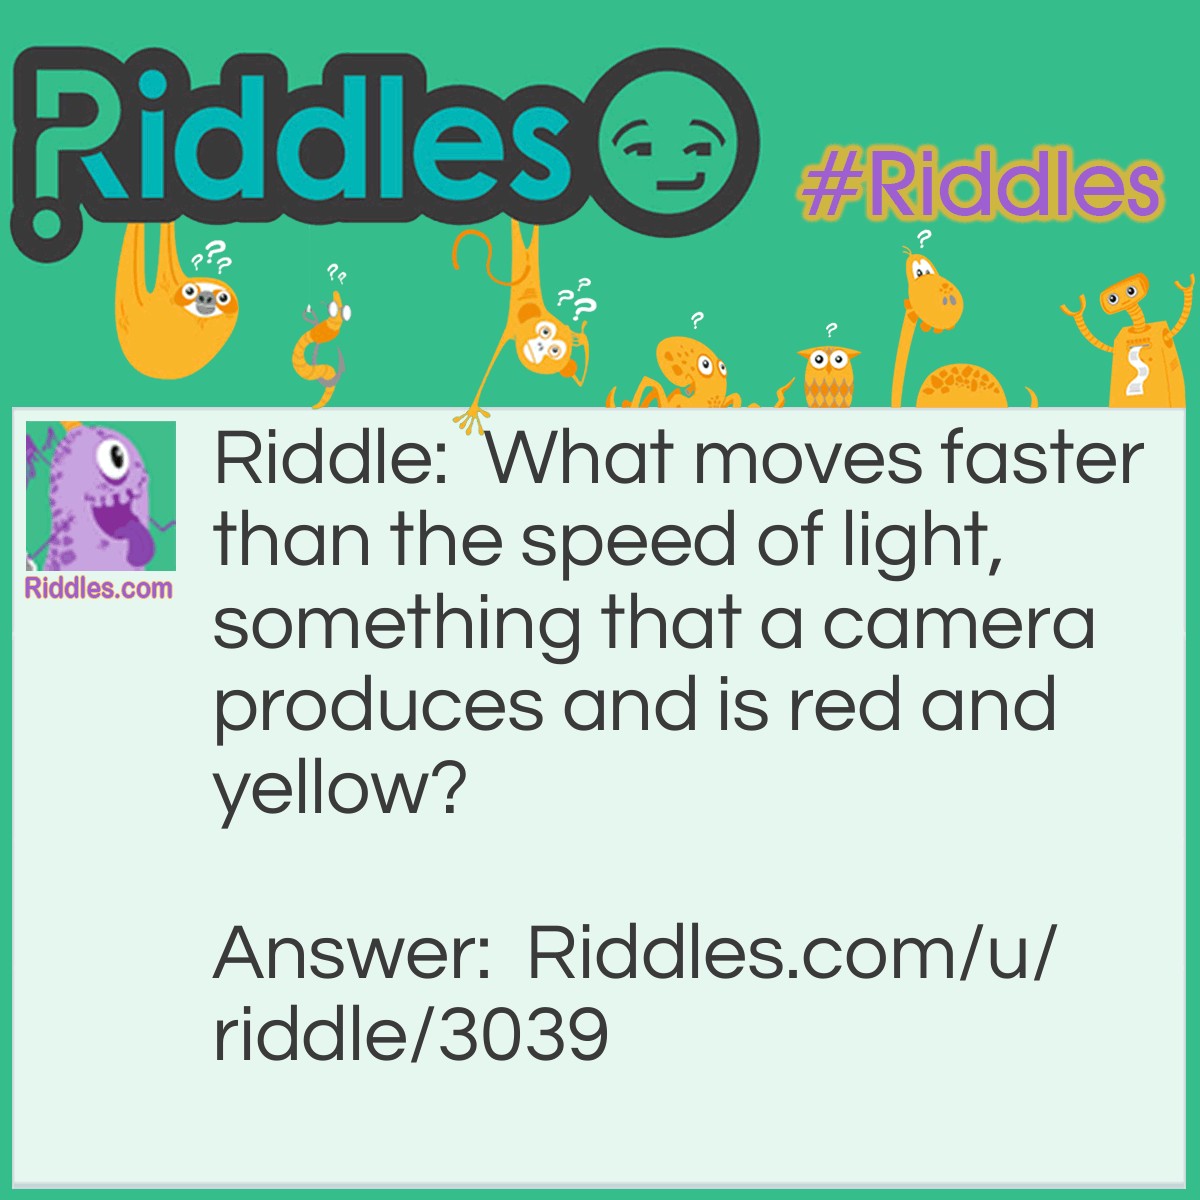 Riddle: What moves faster than the speed of light, something that a camera produces and is red and yellow? Answer: The Flash.